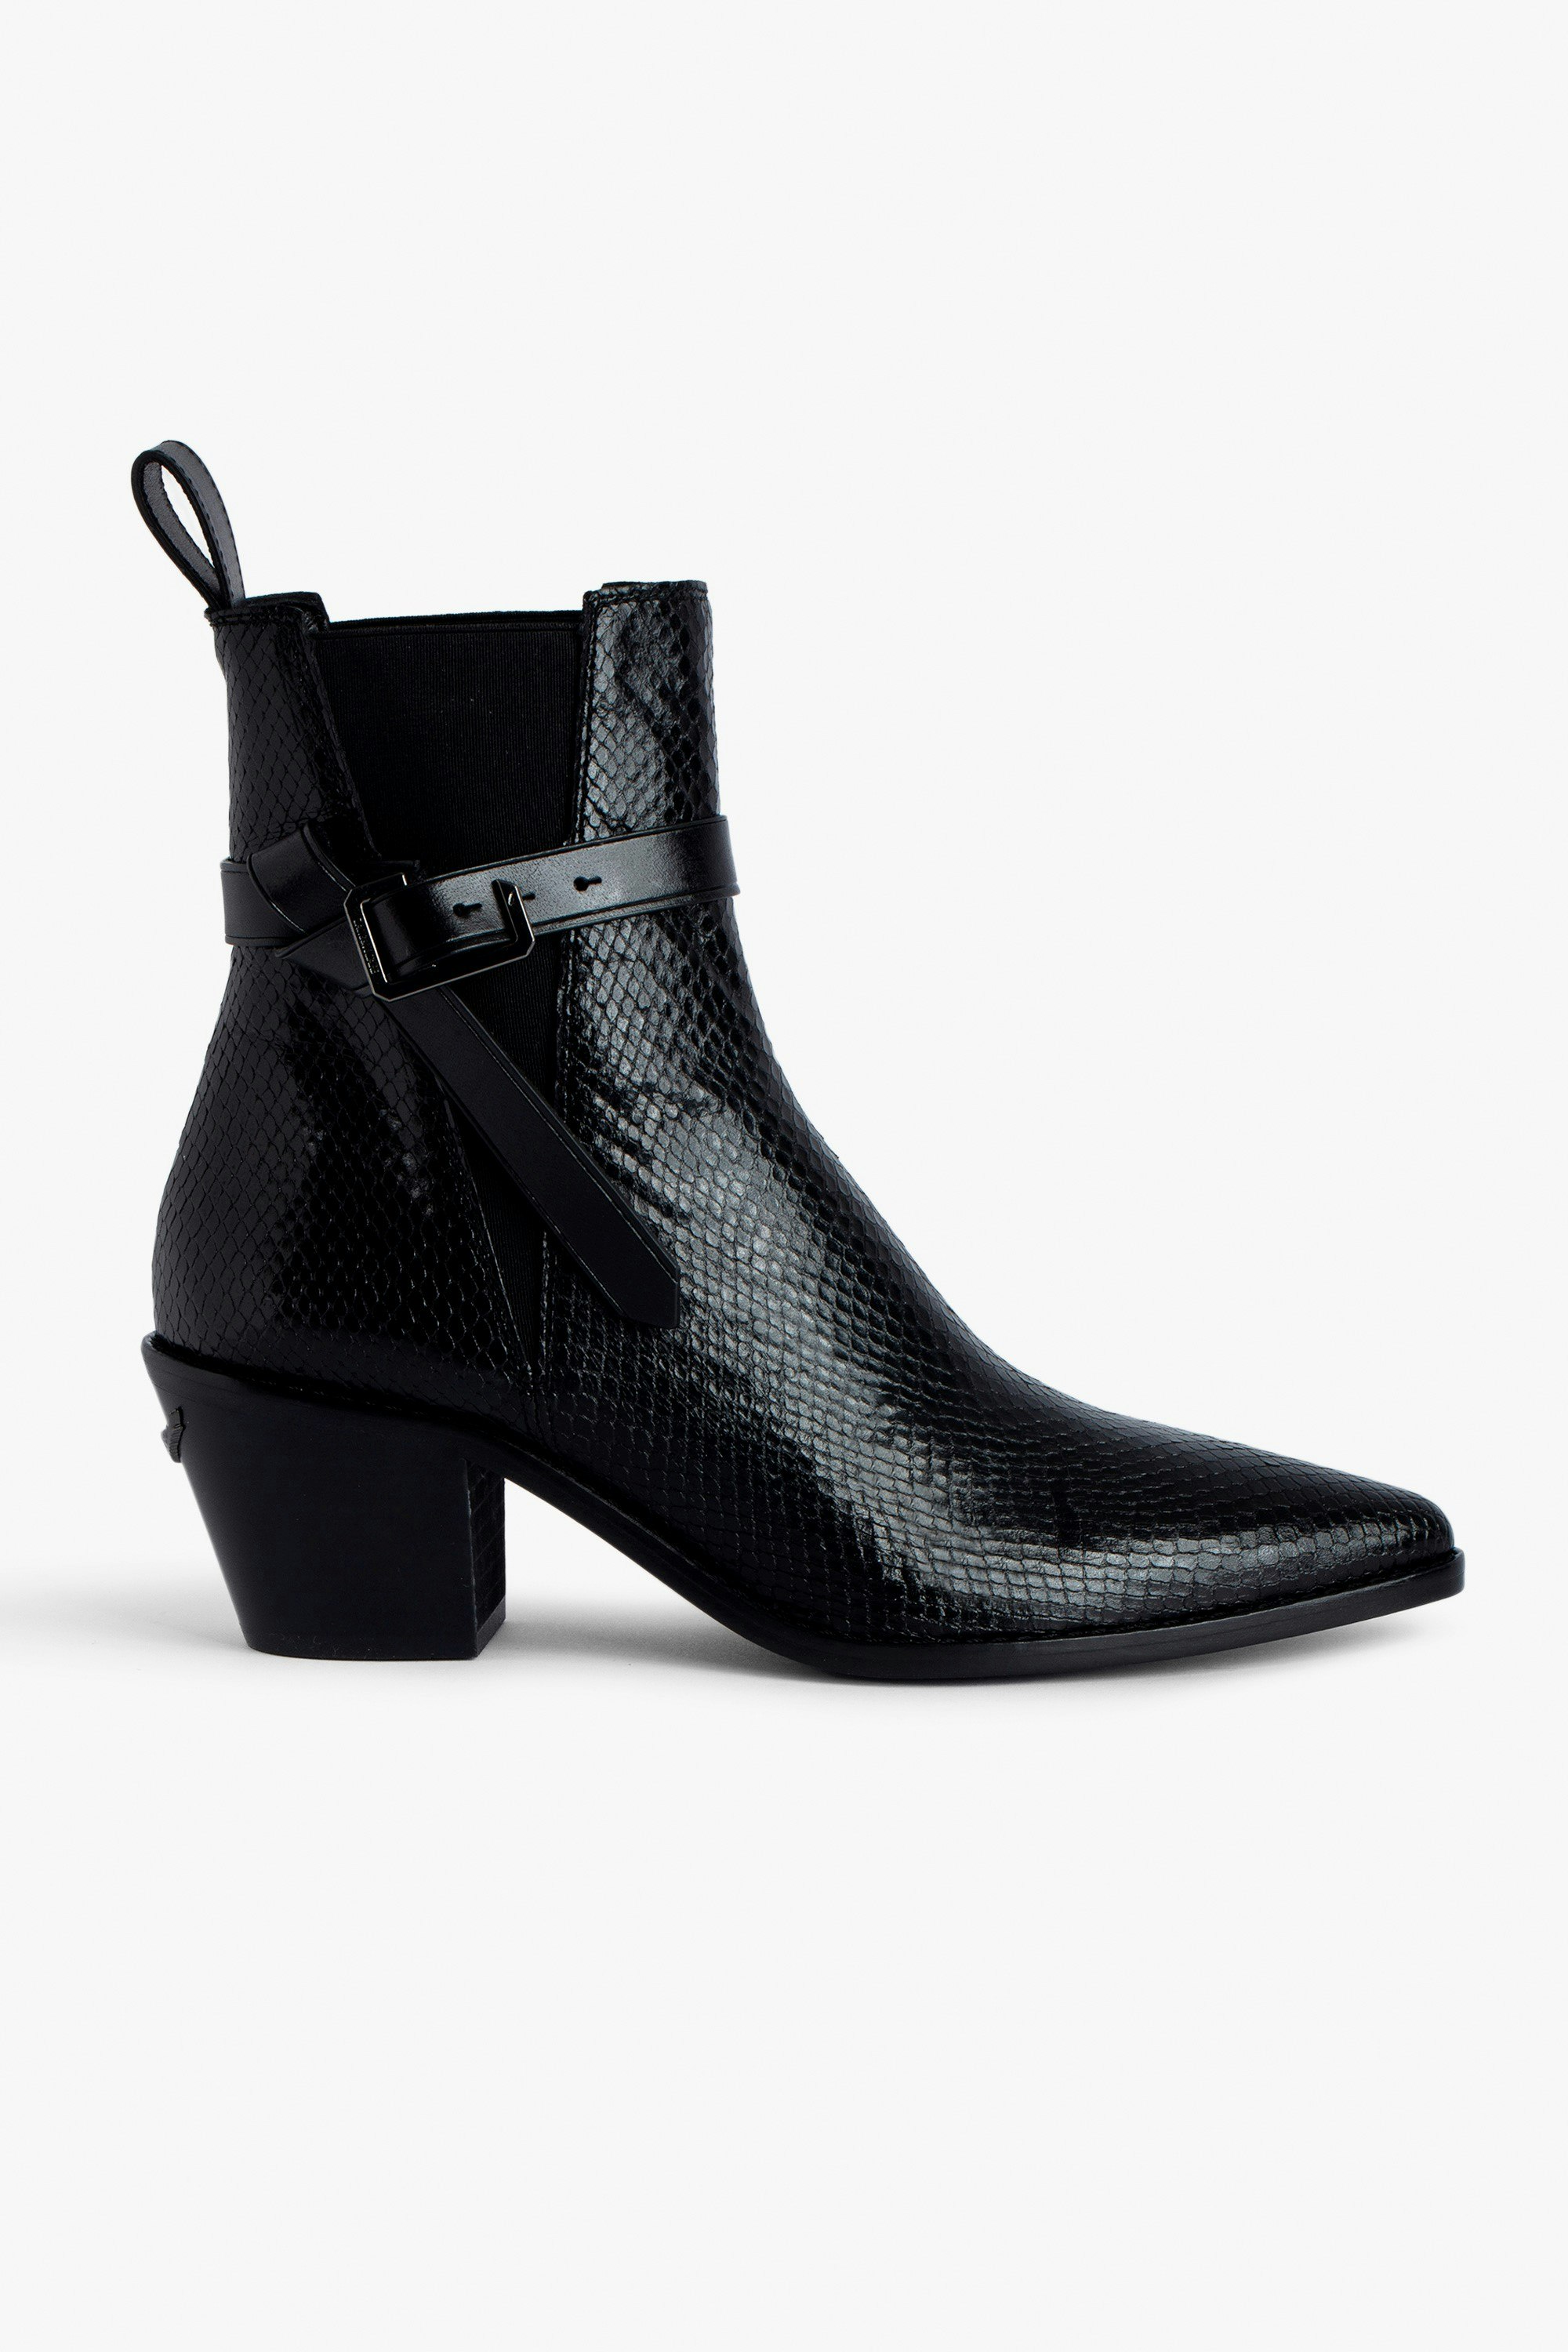 Tyler Ankle Boots Women’s exotic black python-effect leather ankle boots with C buckle.